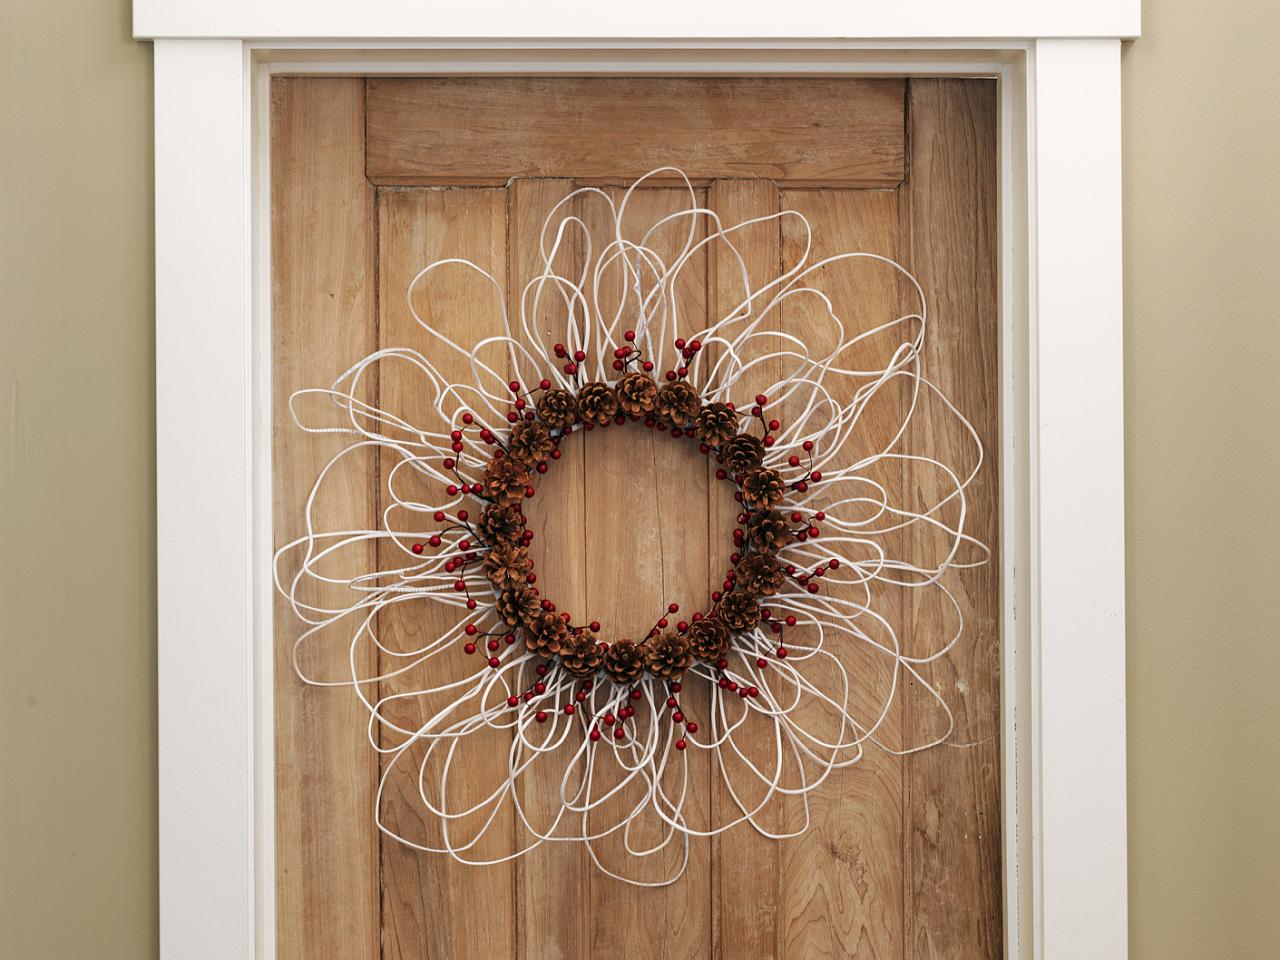 How to Make a Wreath From Electrical Wire, Berries and Pinecones | DIY